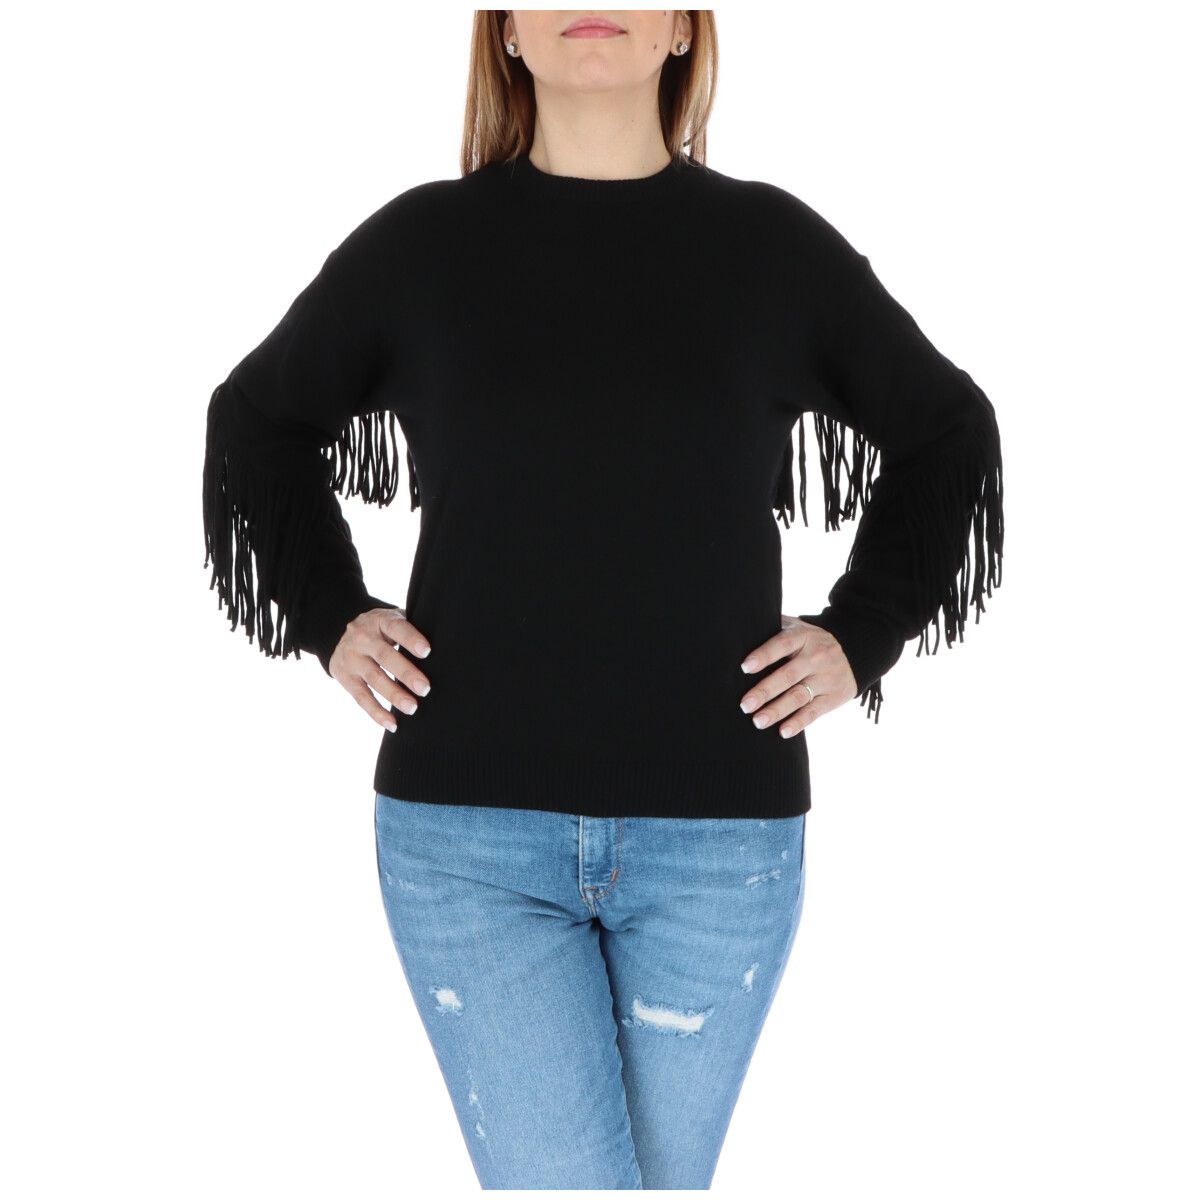 Brand: Pinko
Gender: Women
Type: Knitwear
Season: Fall/Winter

PRODUCT DETAIL
• Color: black
• Sleeves: long
• Neckline: round neck
•  Article code: 1B14VD Y694

COMPOSITION AND MATERIAL
• Composition: -4% cashmere -20% cotton -20% wool -23% polyamide -33% viscose 
•  Washing: handwash